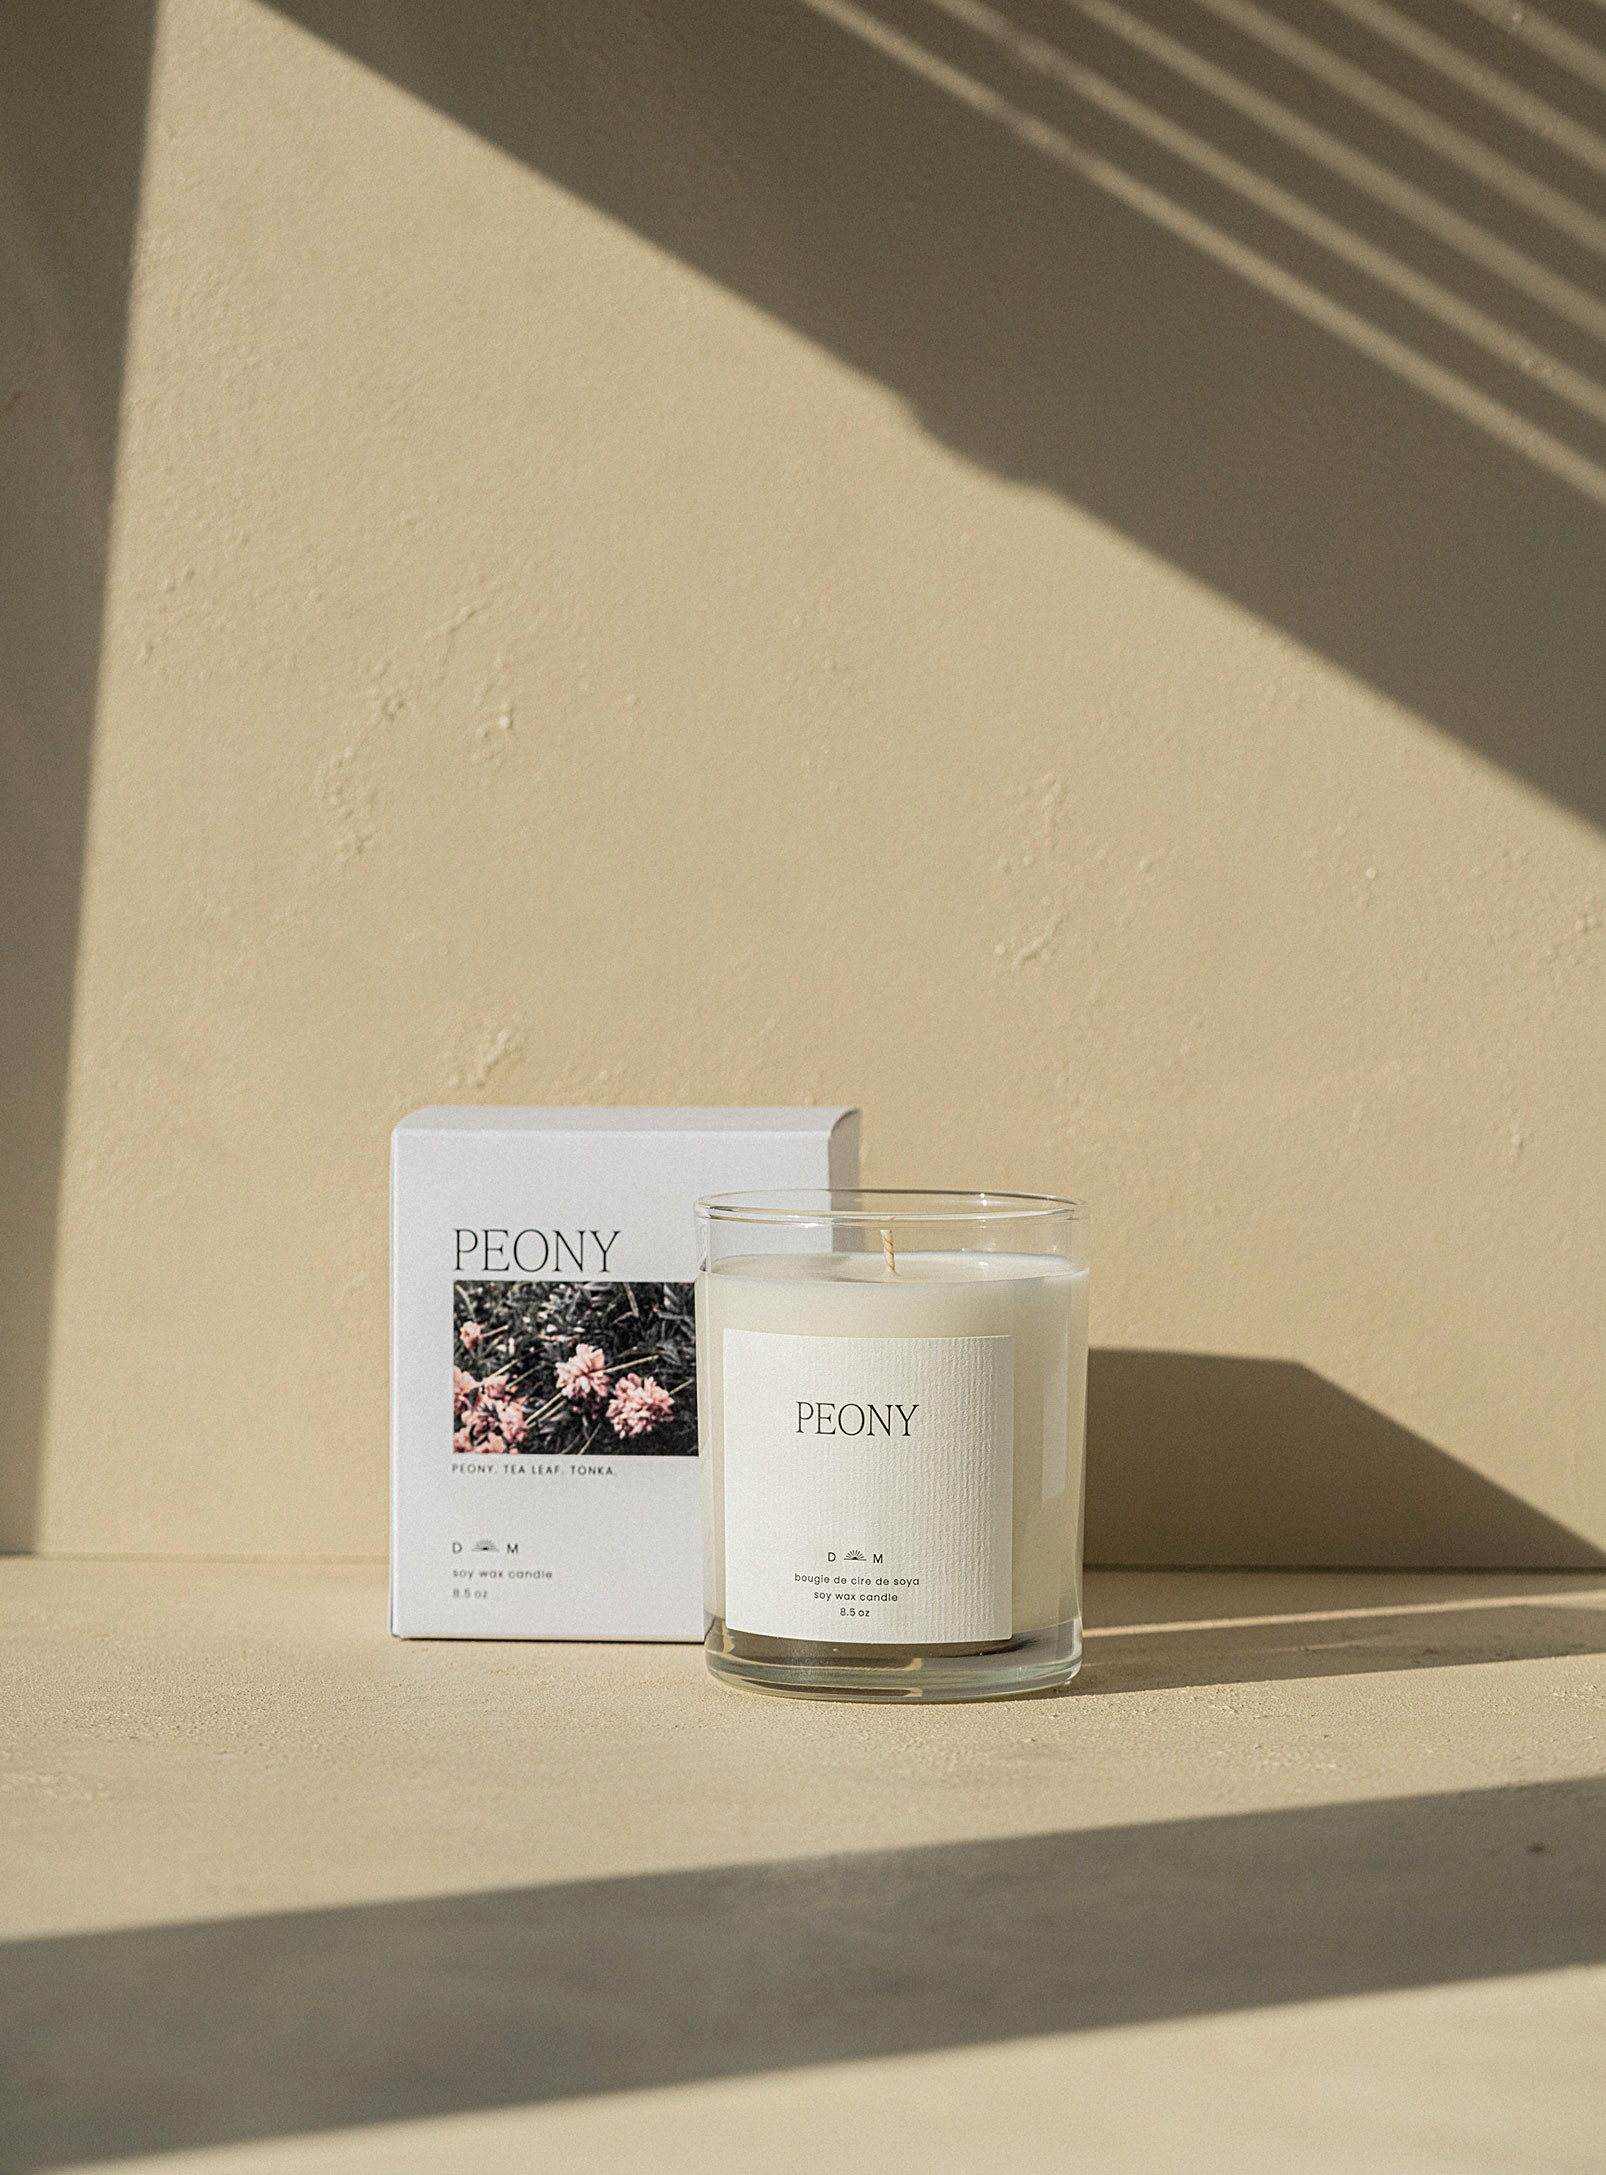 Dimanche Matin - Peony candle